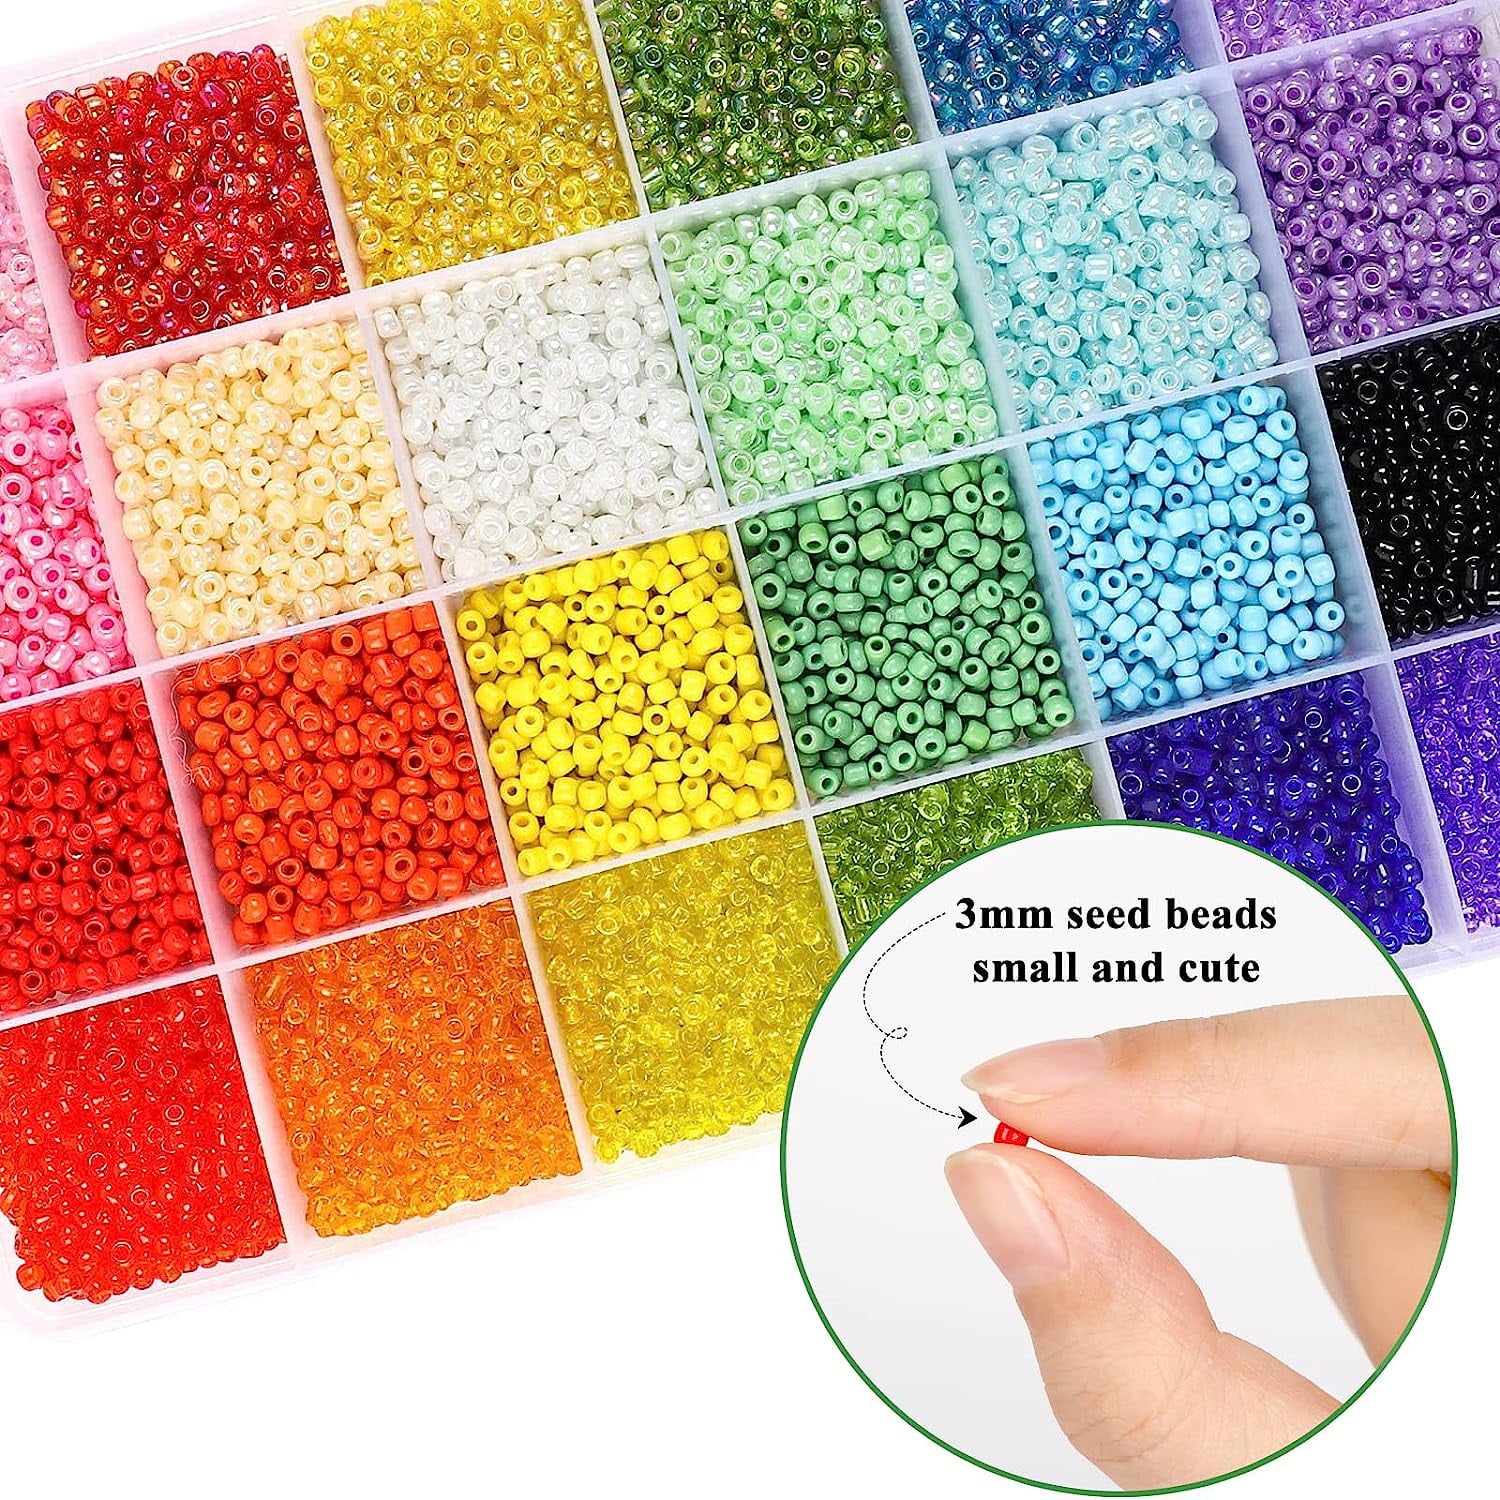 BALABEAD 3mm Round Size Almost Uniform Seed Beads About 4600pcs /110 Grams  in Box Opaque White Color Seed Beads Size 8/0 Glass Craft Seed Beads for